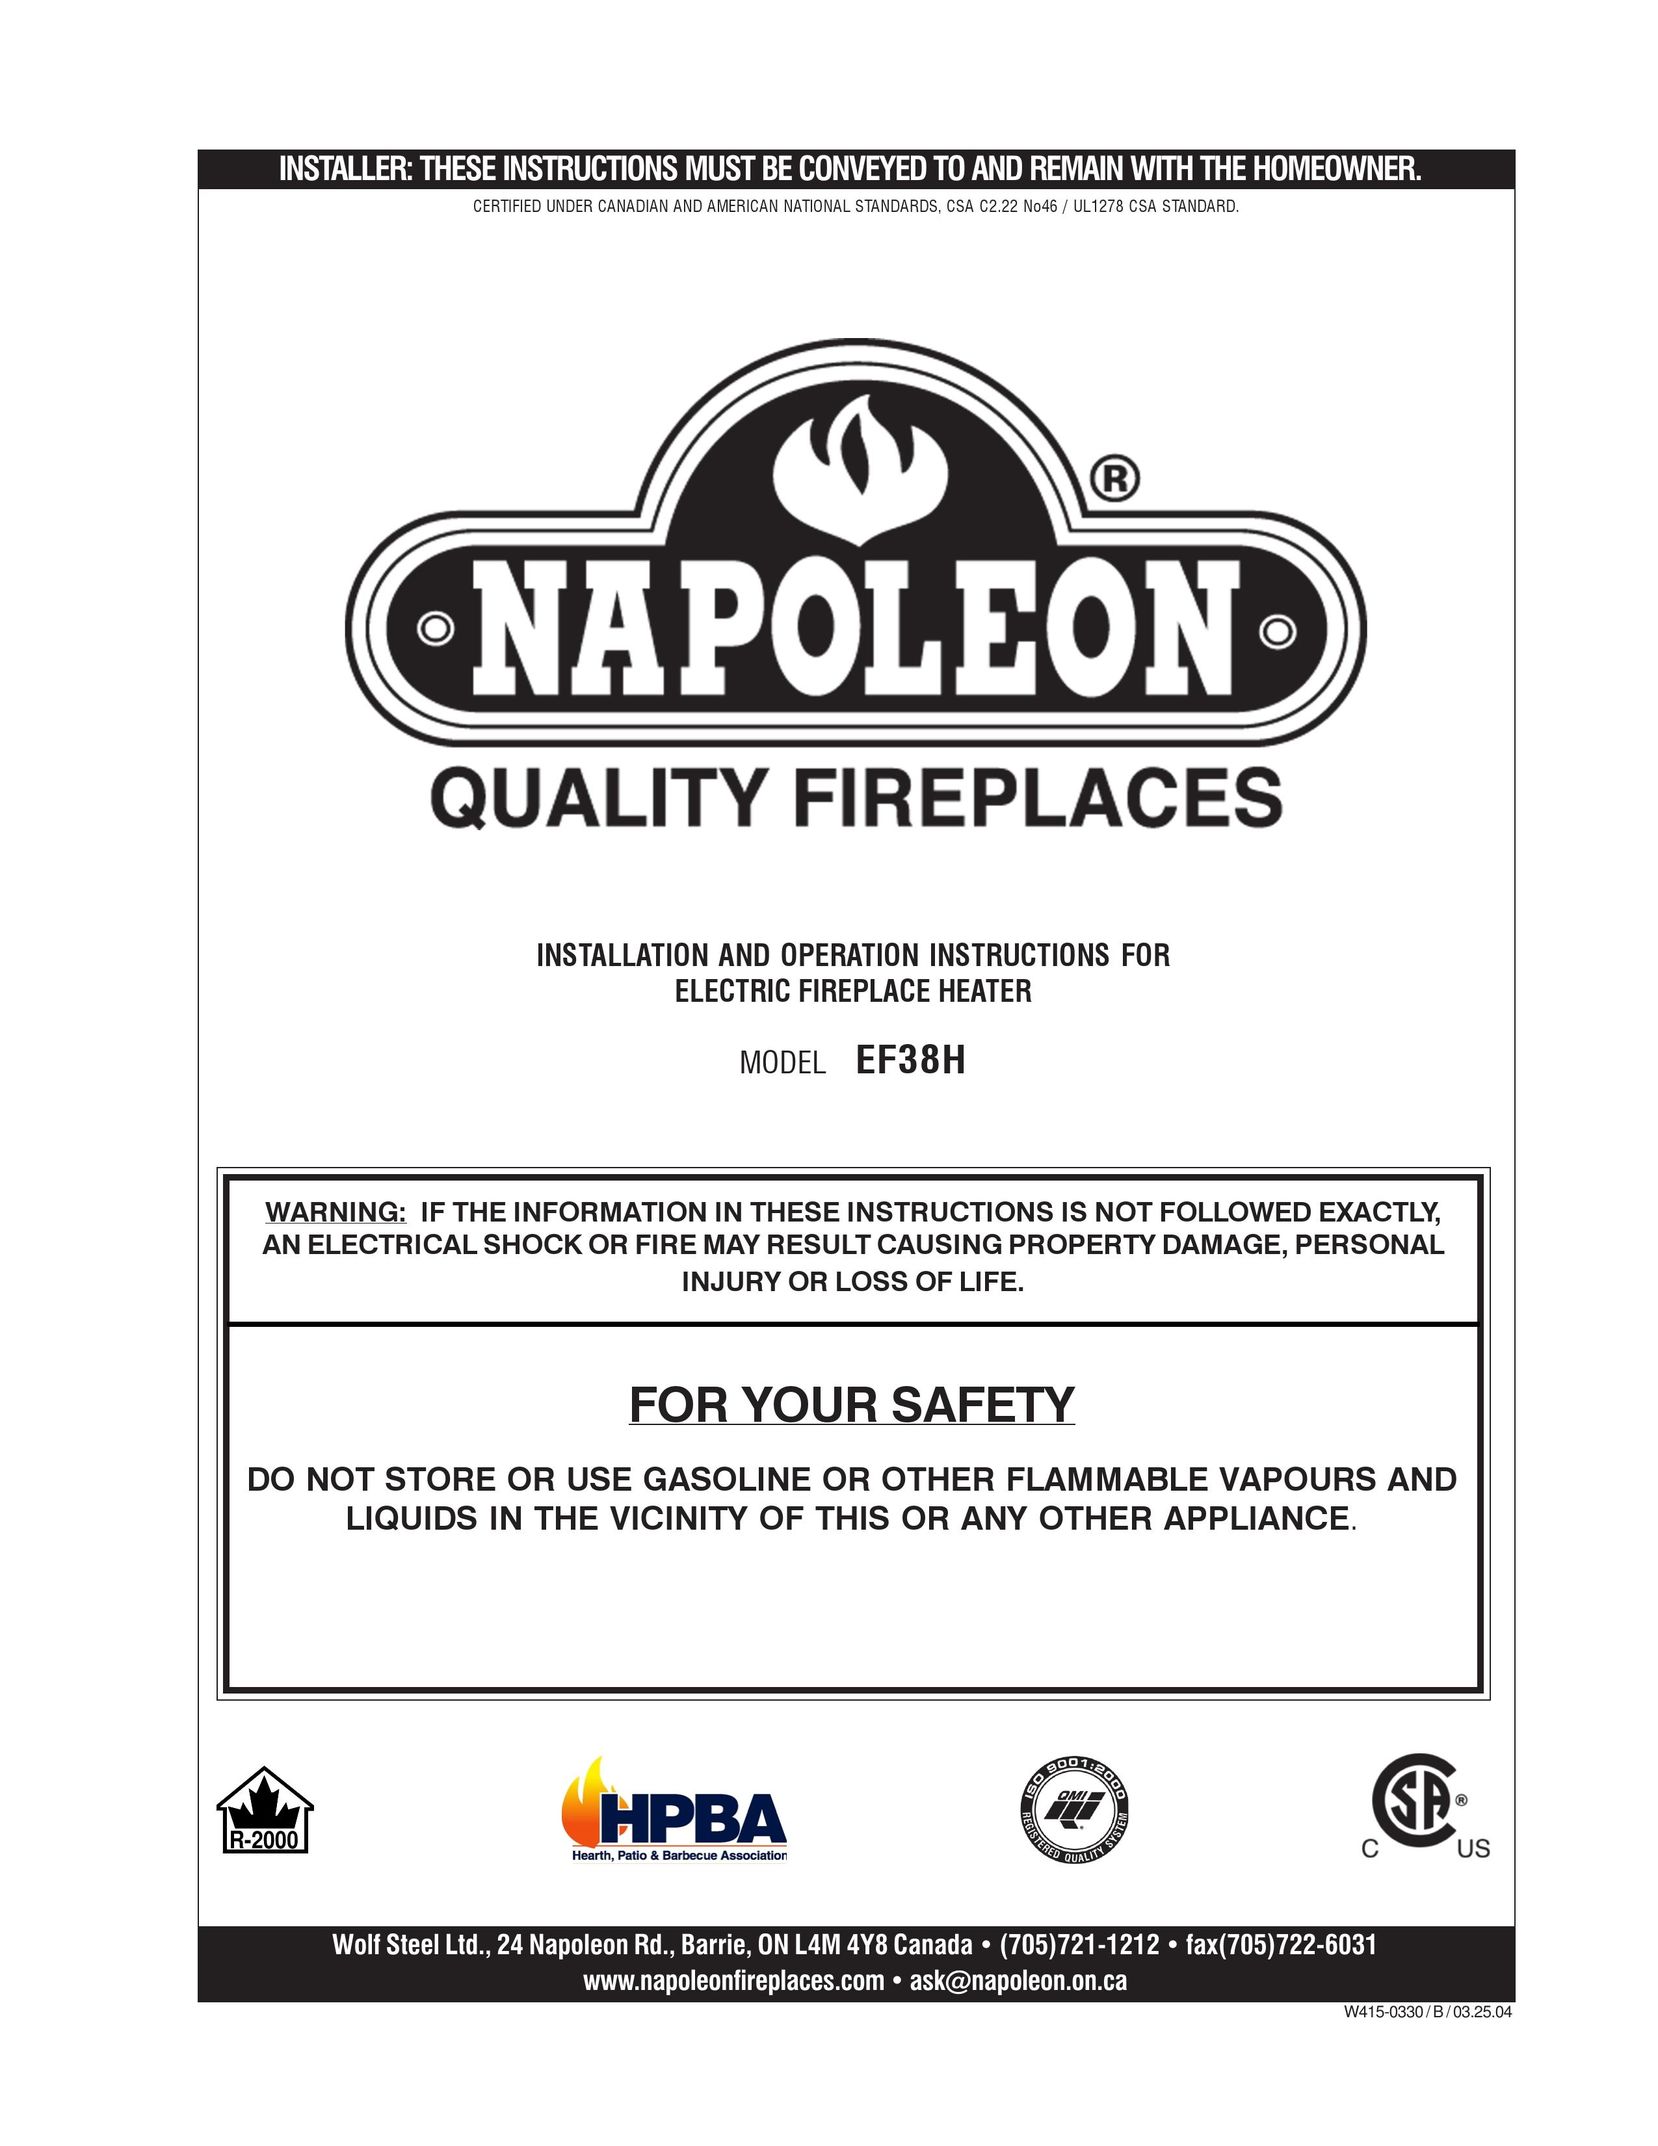 Napoleon Fireplaces EF38H Indoor Fireplace User Manual